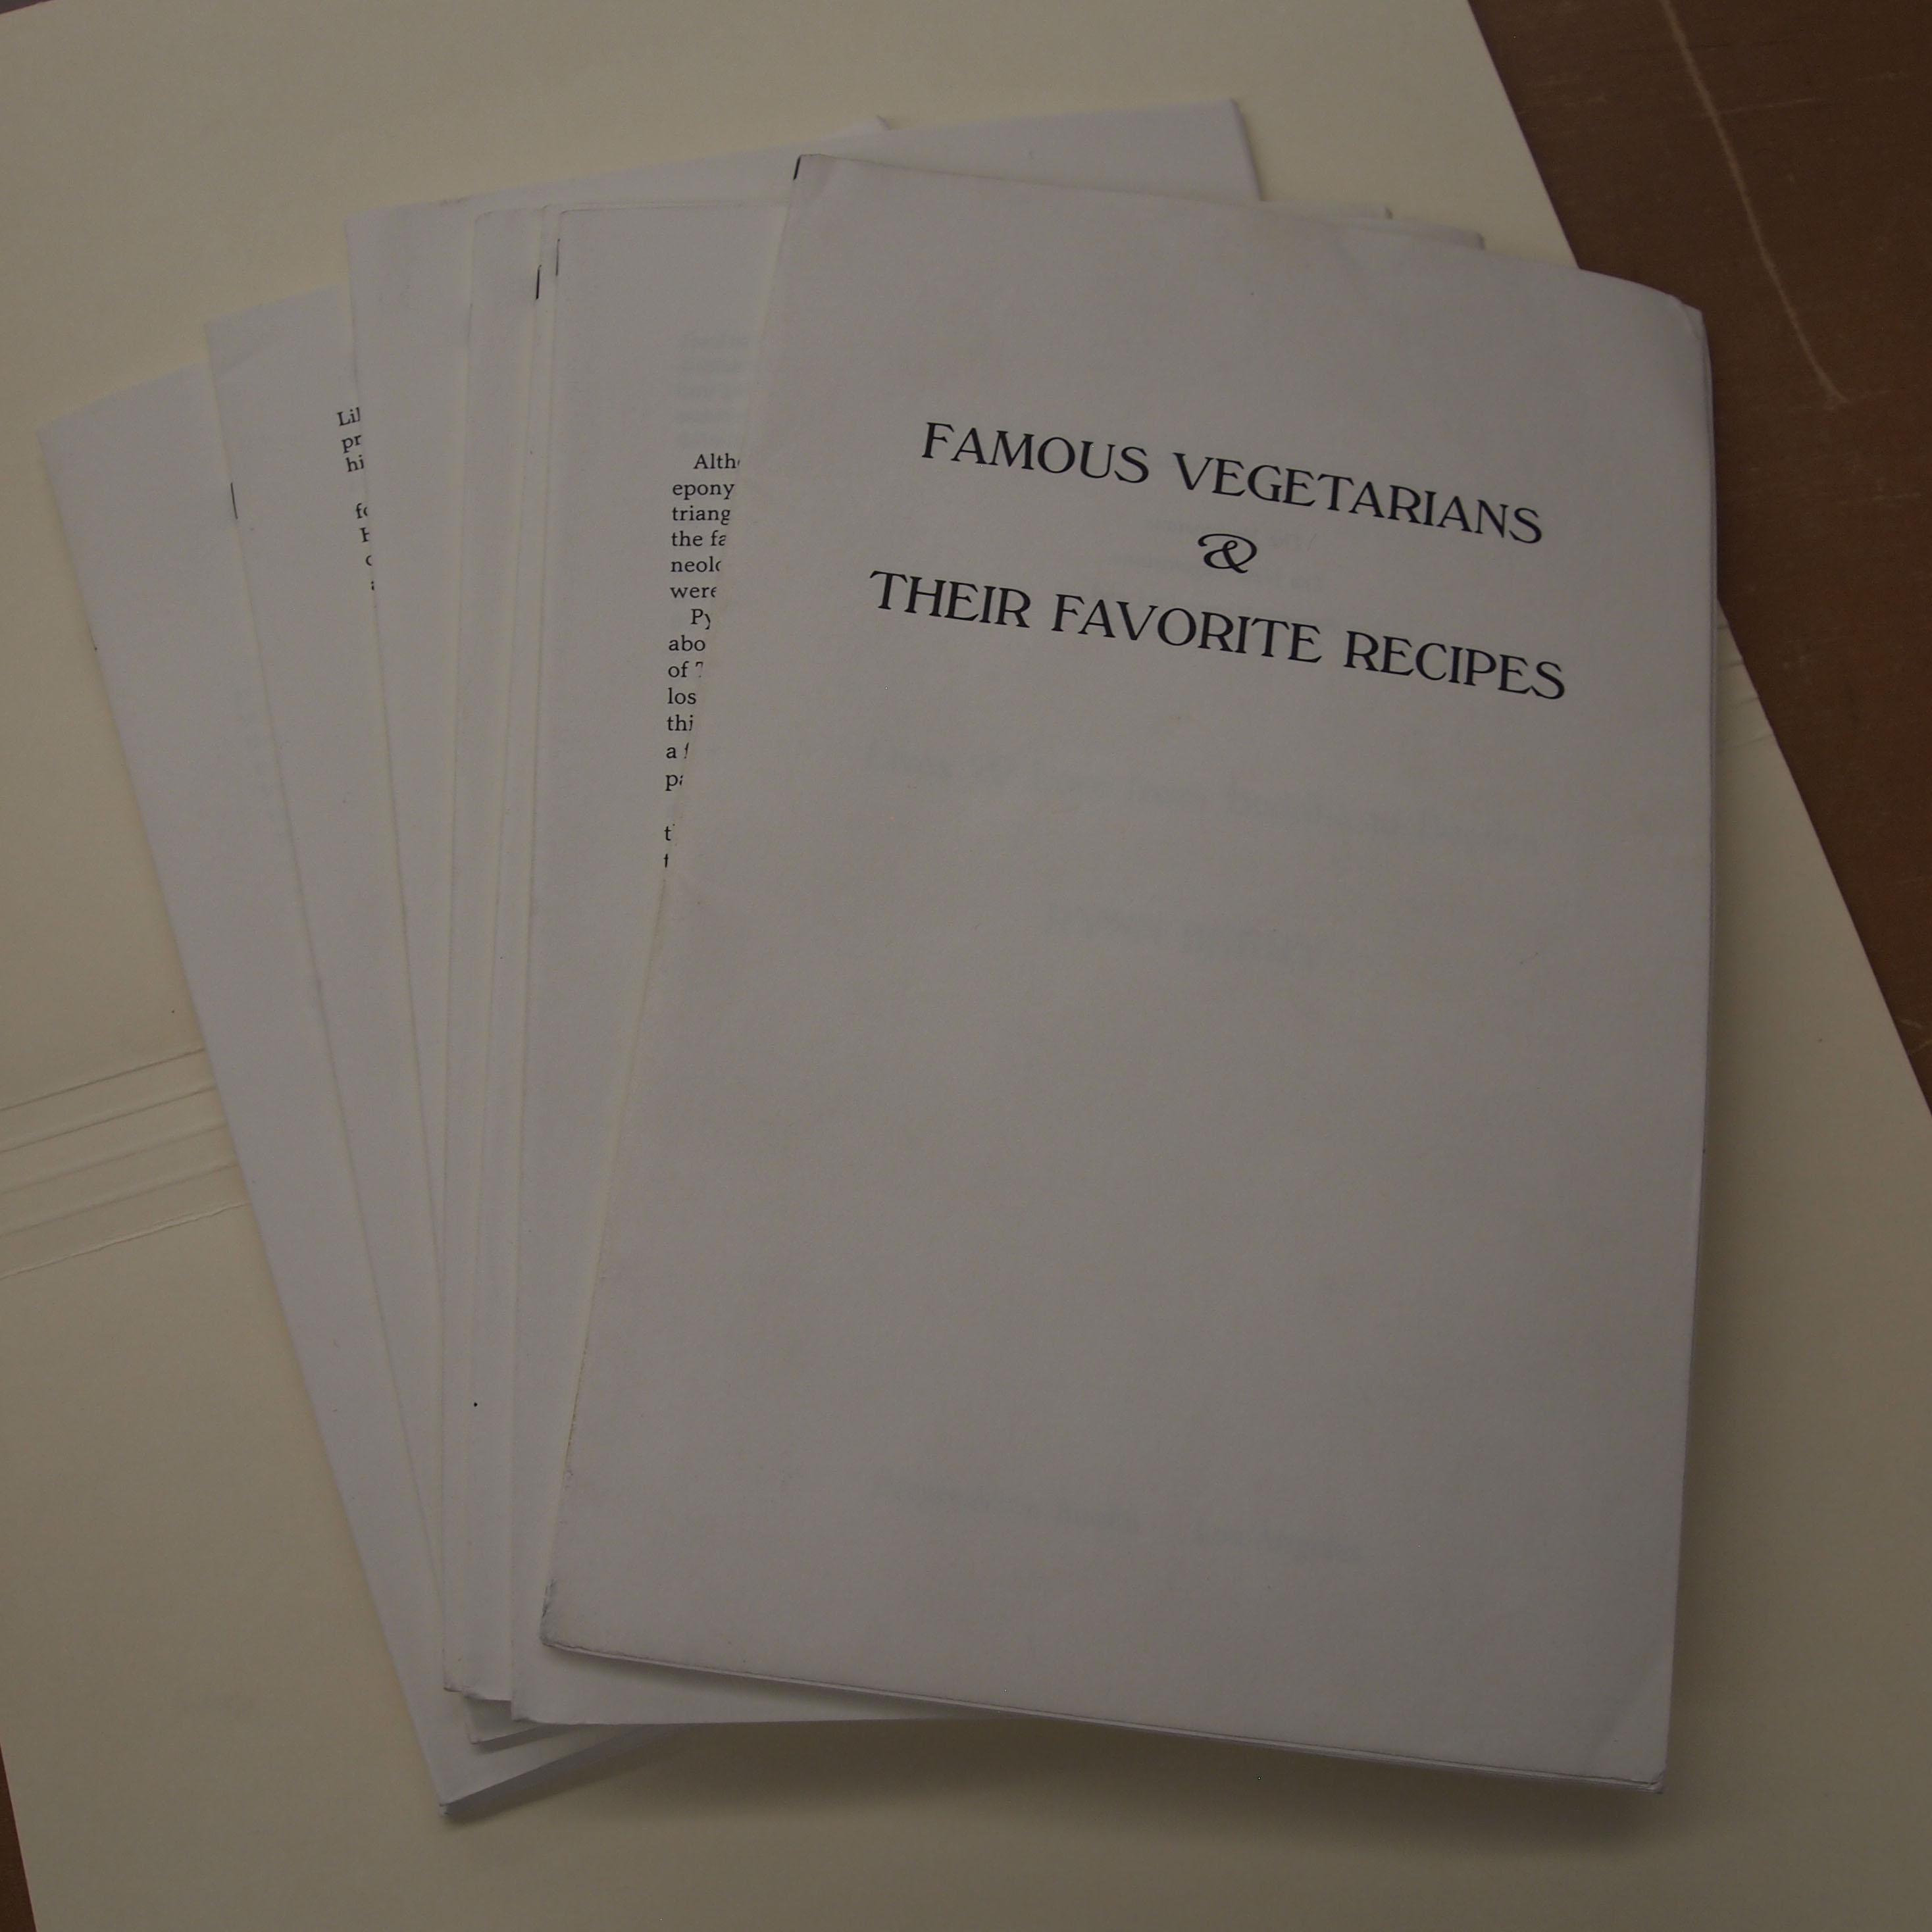 Page proofs for Rynn Berry, Jr.'s Famous Vegetarians and Their Favorite Recipes, used in the final steps of proofreading before publication